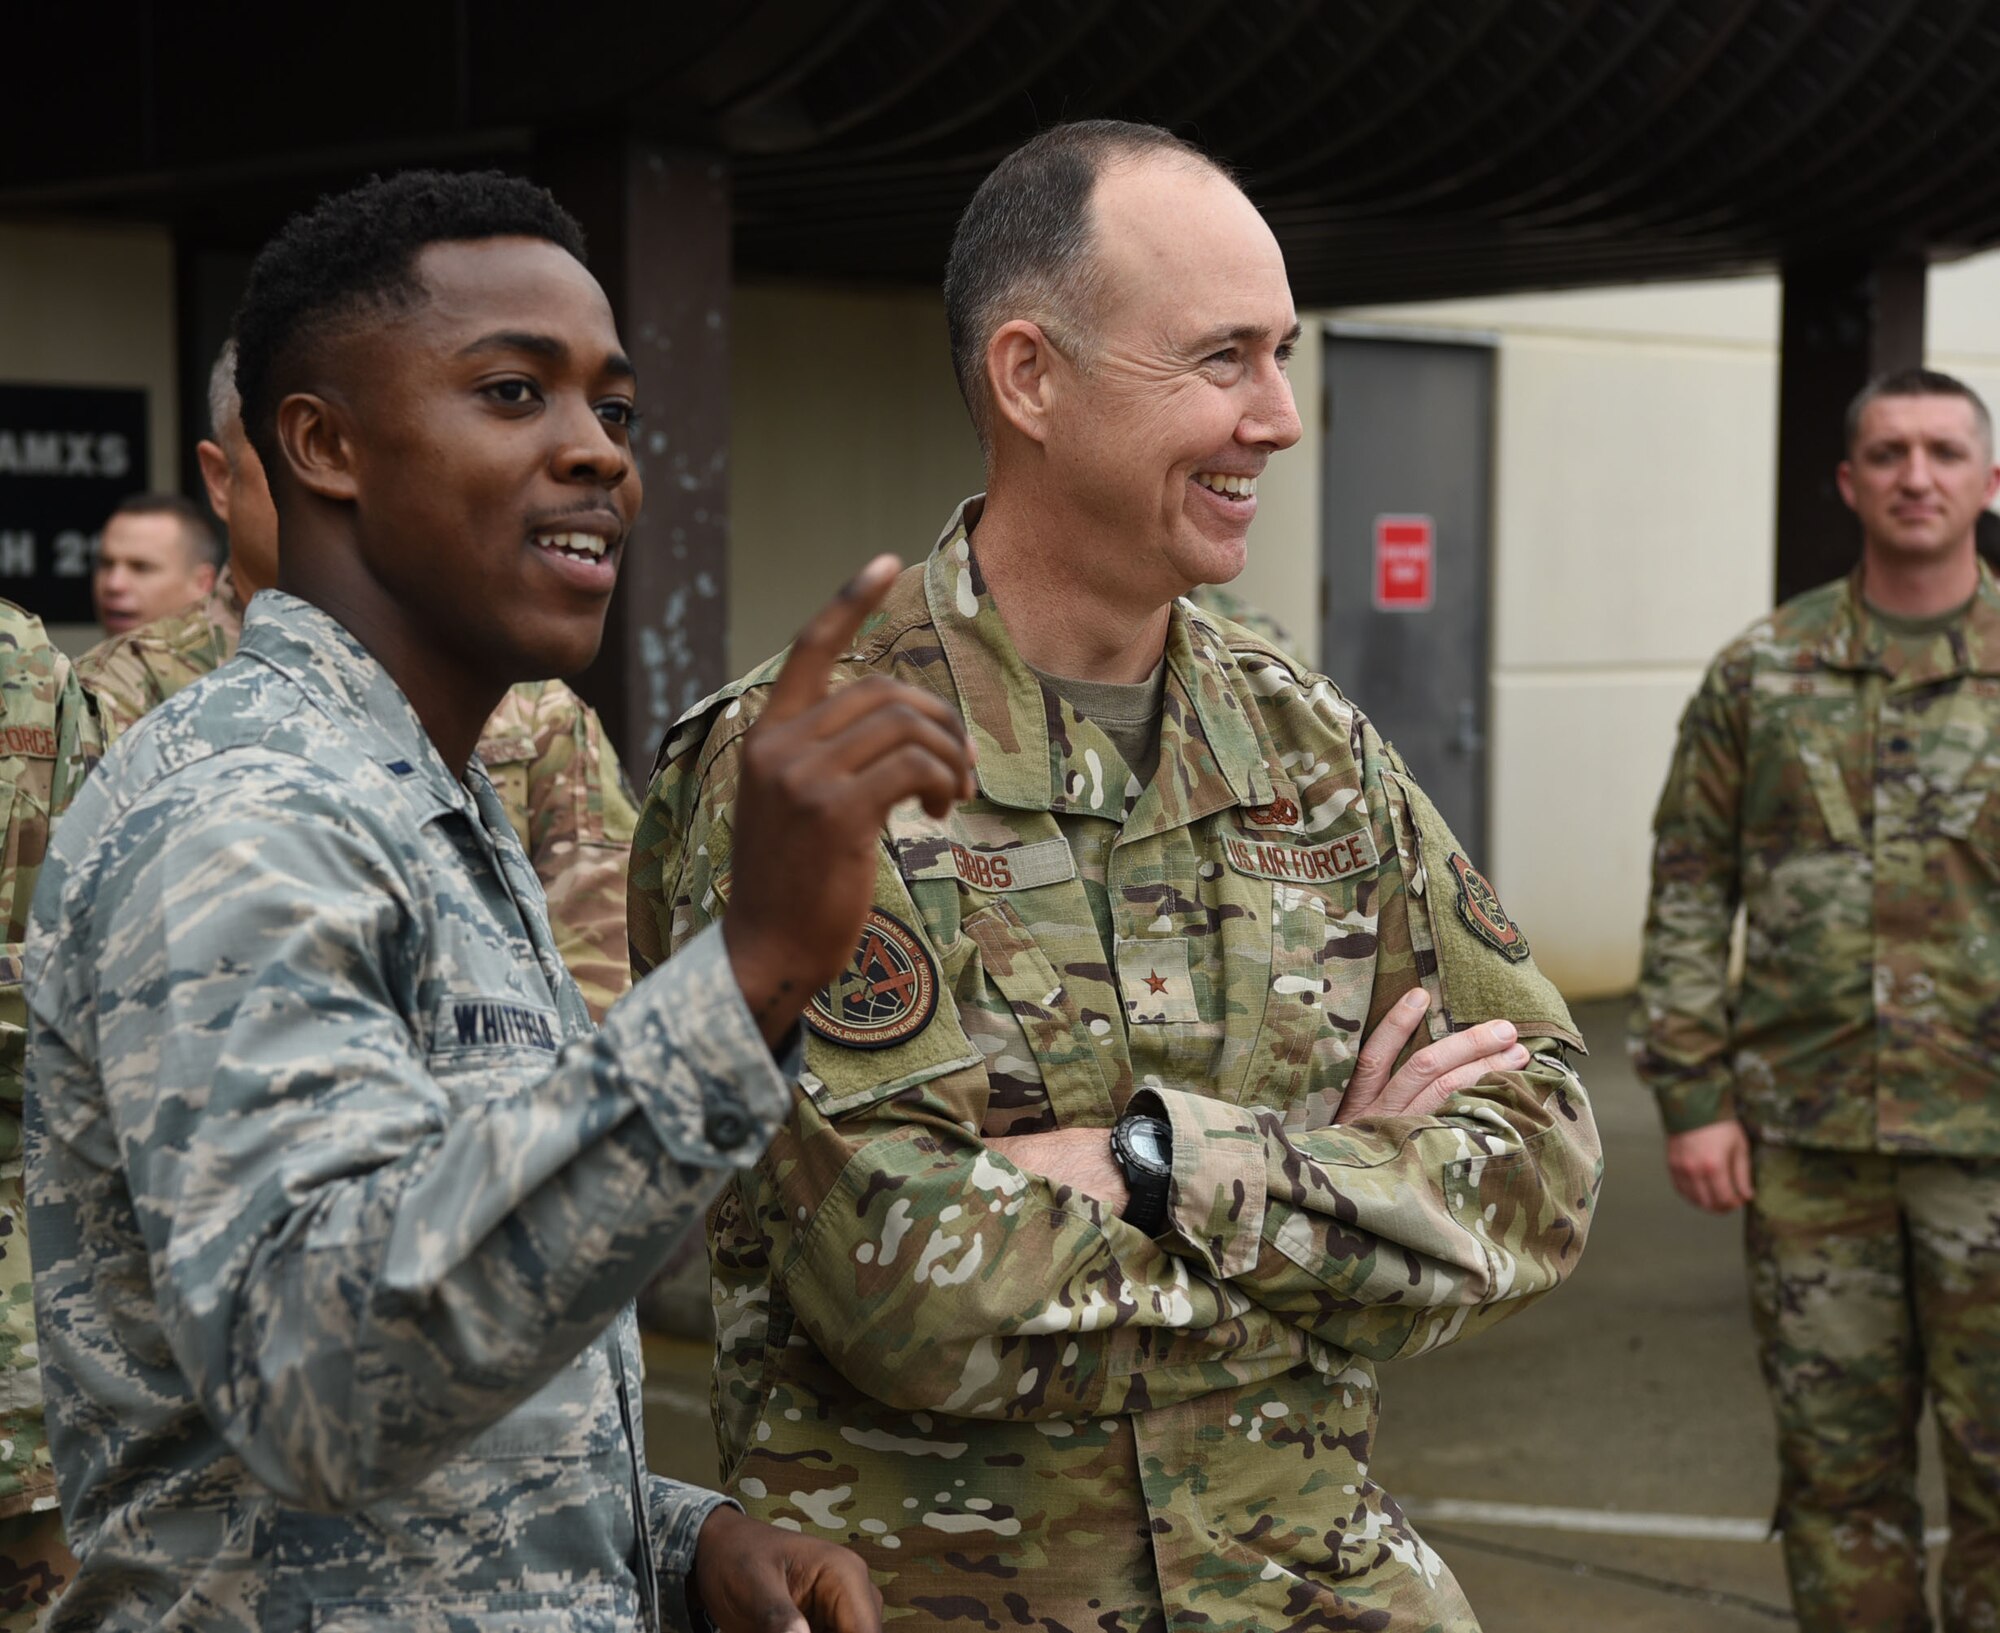 1st Lt. David Whitfield, 605th Aircraft Maintenance Squadron Air Mobility Unit officer in charge, showcases the flight line layout to Brig. Gen. Richard W. Gibbs, Air Mobility Command, Logistics, Engineering and Force Protection director, at Joint Base McGuire-Dix-Lakehurst, N.J., Oct. 31, 2019. Whitfield discussed the plans to replace unserviceable hangars as well as where the new hangar will be located to hold the incoming KC-46 Pegasus. (U.S. Air Force photo by Airman 1st Class Ariel Owings)